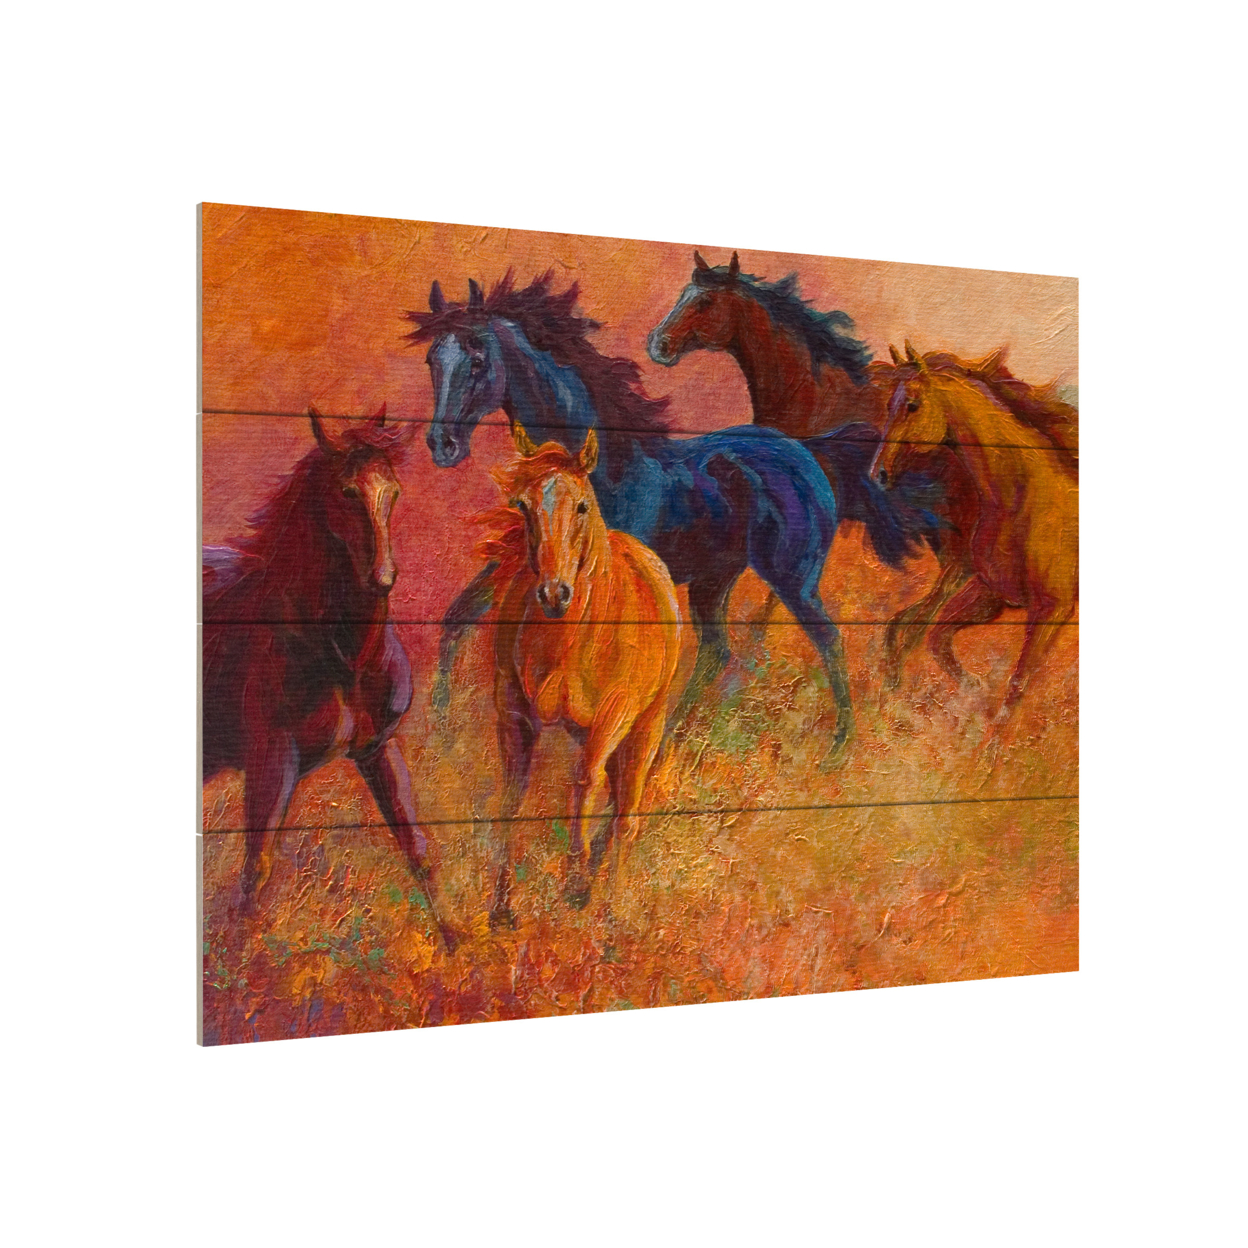 Wall Art 12 X 16 Inches Titled Free Range Horses Ready To Hang Printed On Wooden Planks